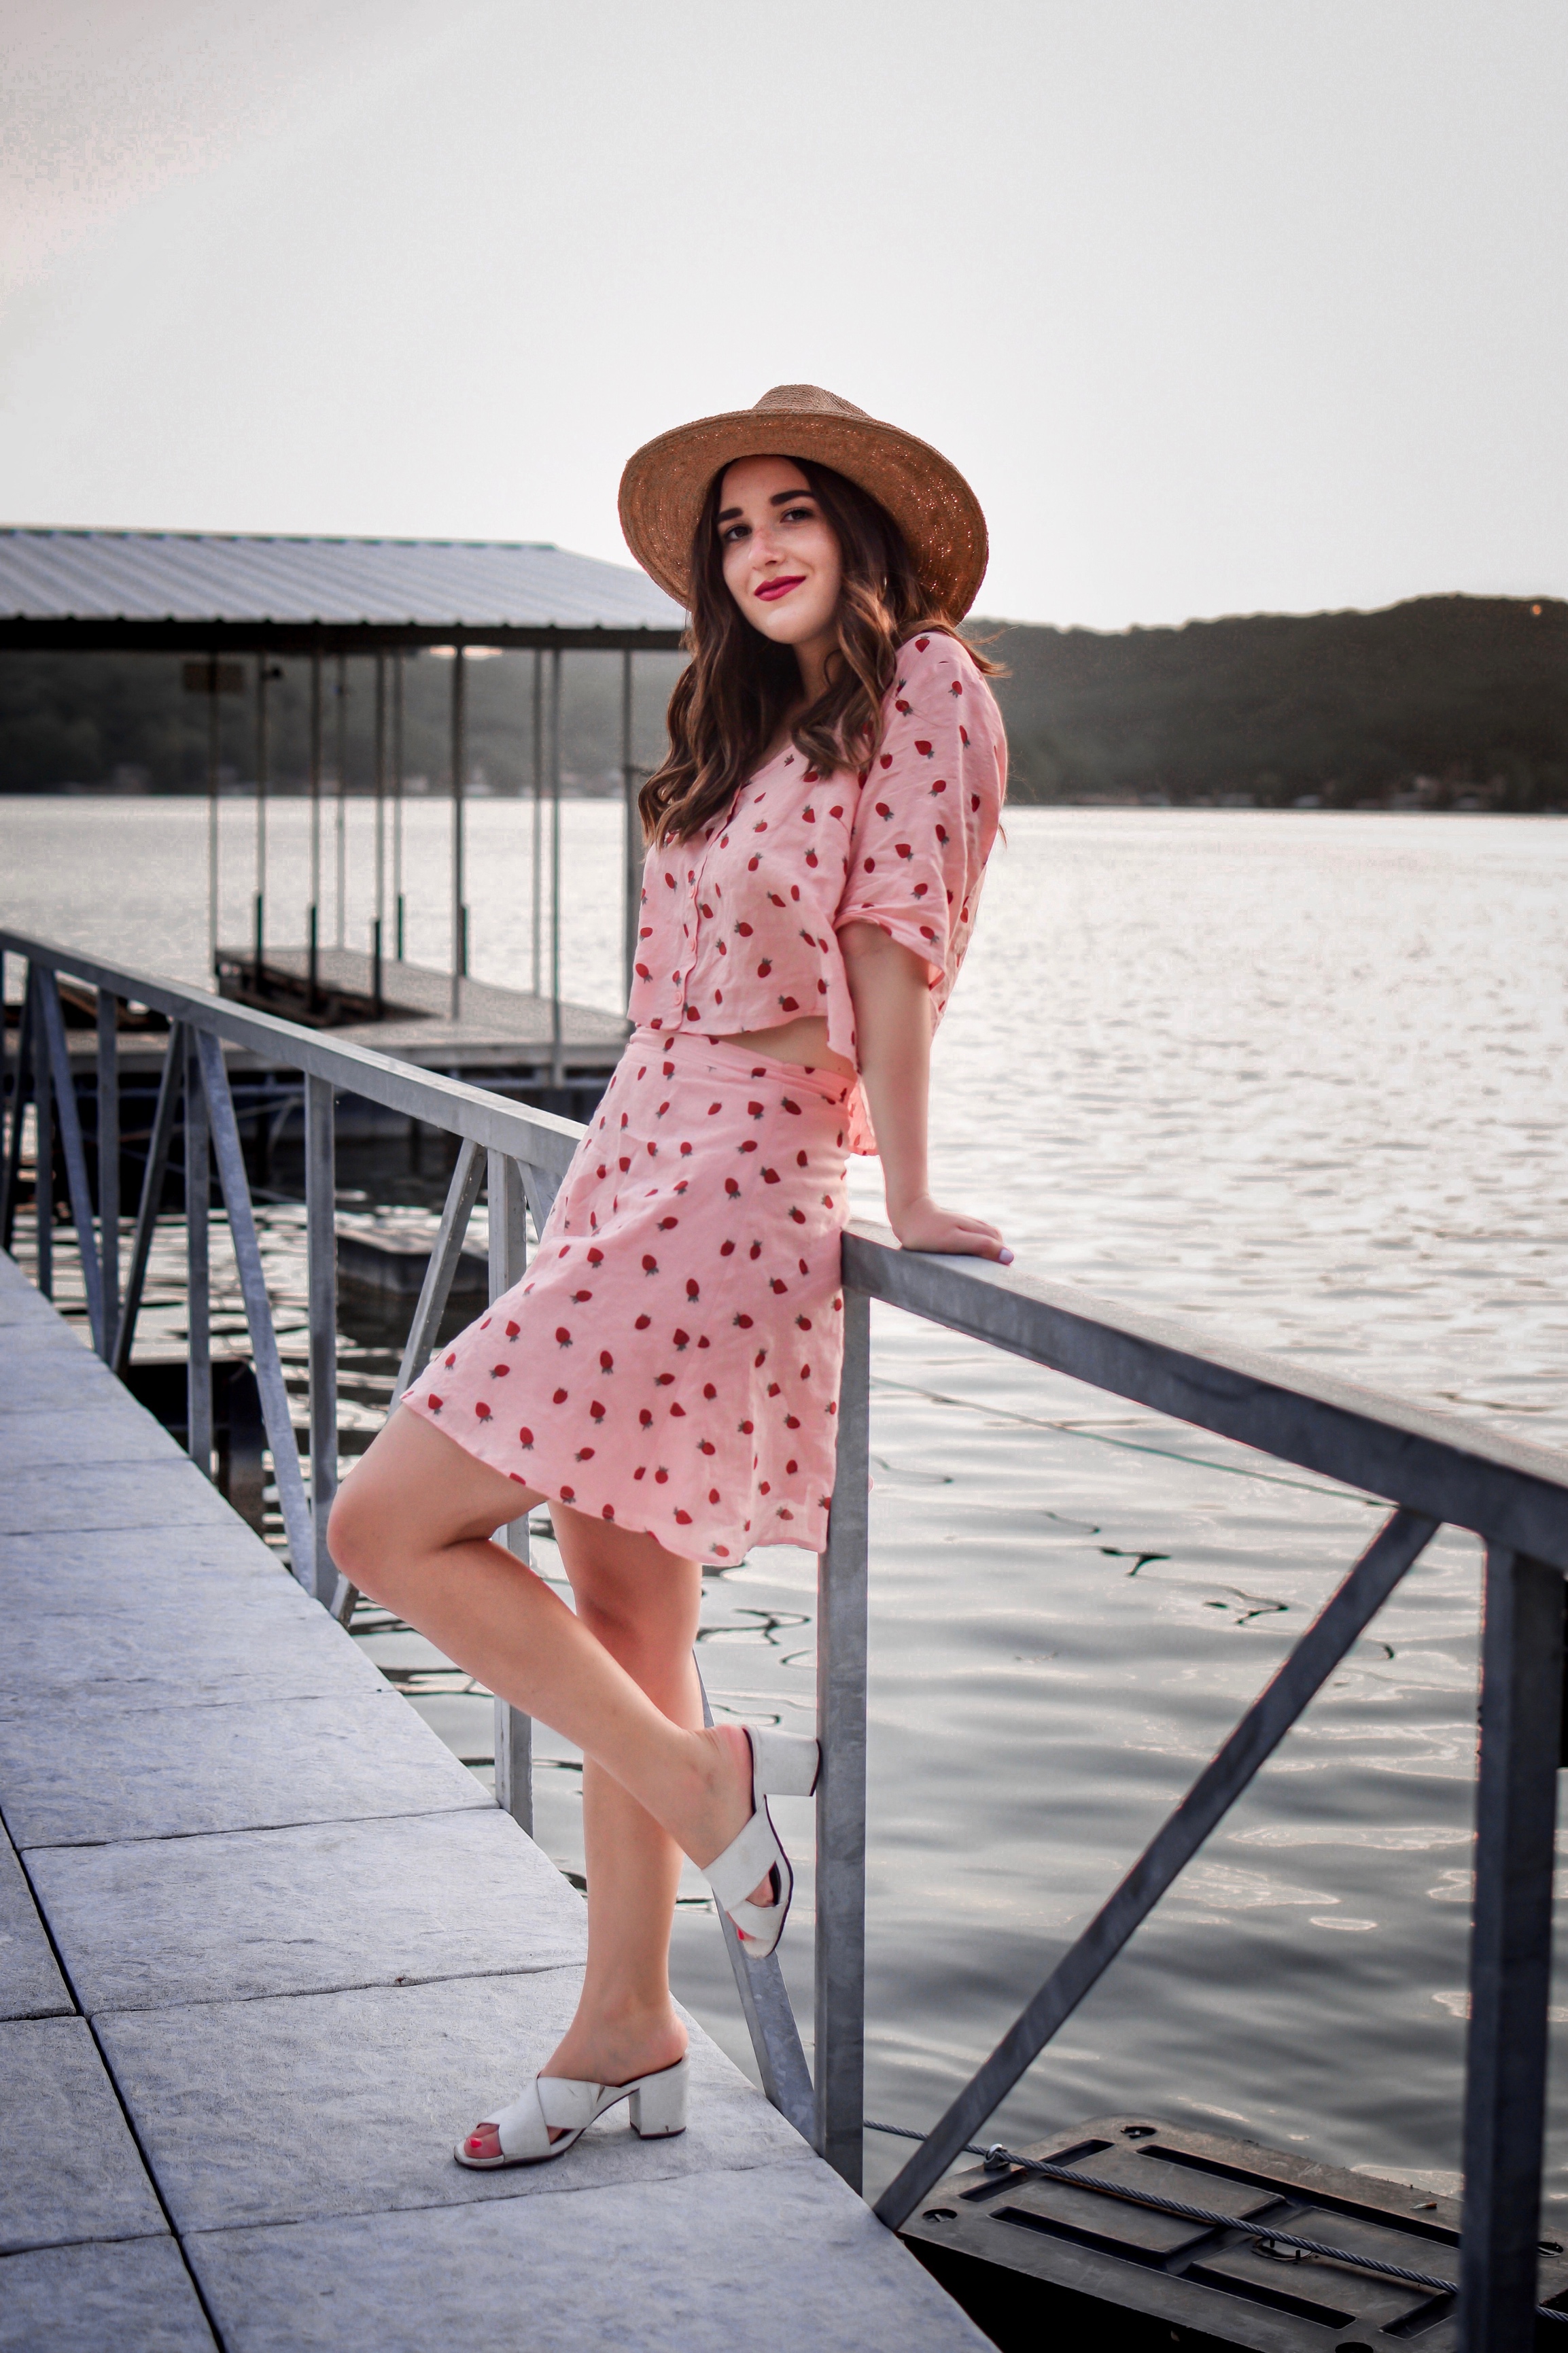 Strawberry Set Walmart Fashion Esther Santer Fashion Blog NYC Street Style Blogger Outfit OOTD Trendy Shopping Girl What How To Wear Affordable Fruit Trend Straw Hat Vacation Lake of the Ozarks White Mules Sandals Nature Travel  Shopping Two Piece Set.JPG